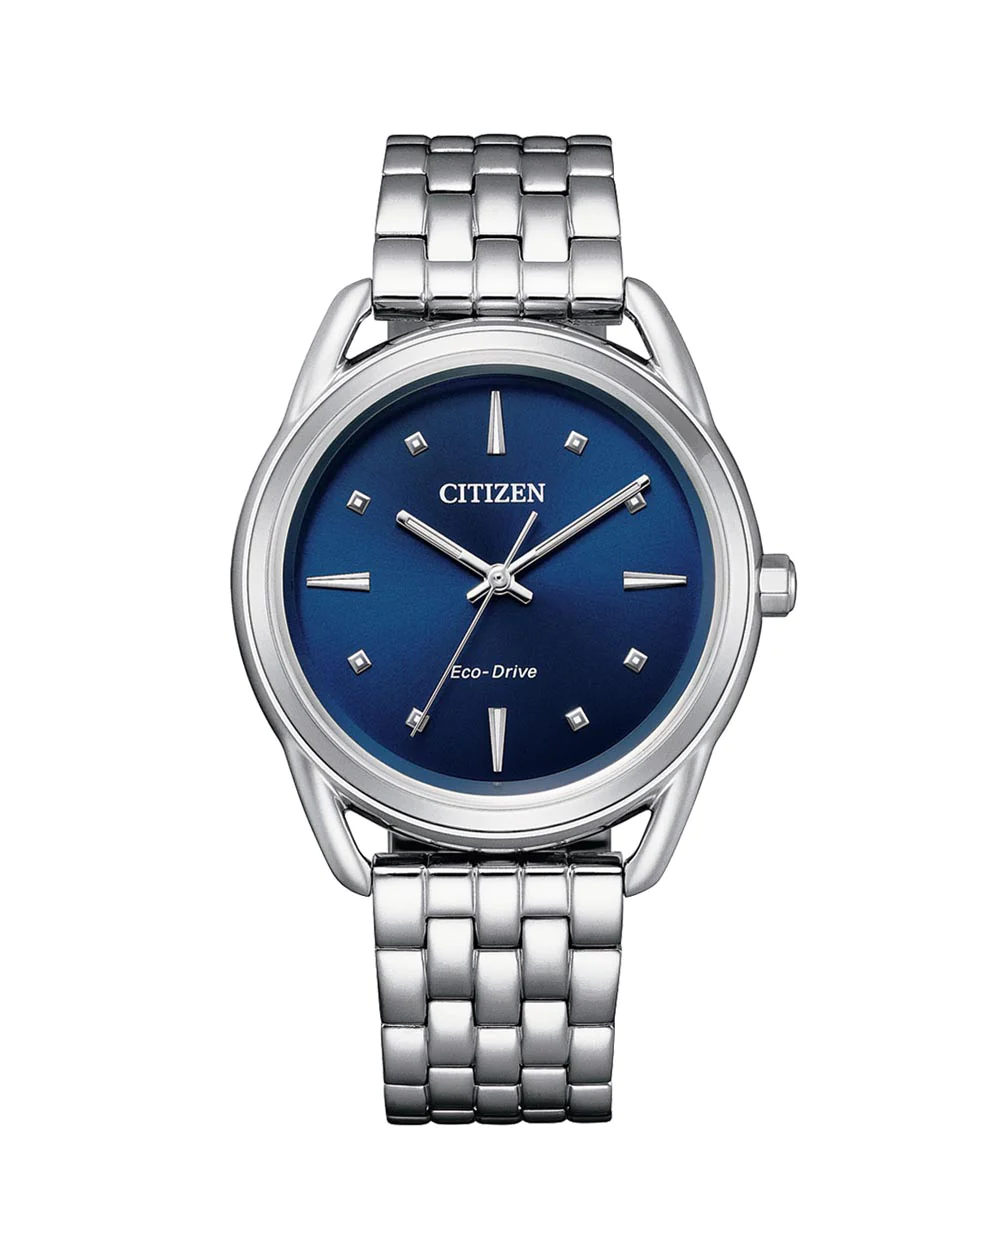 Citizen Eco-Drive Ladies Stainless Steel Dress Watch - FE7090-55L ...